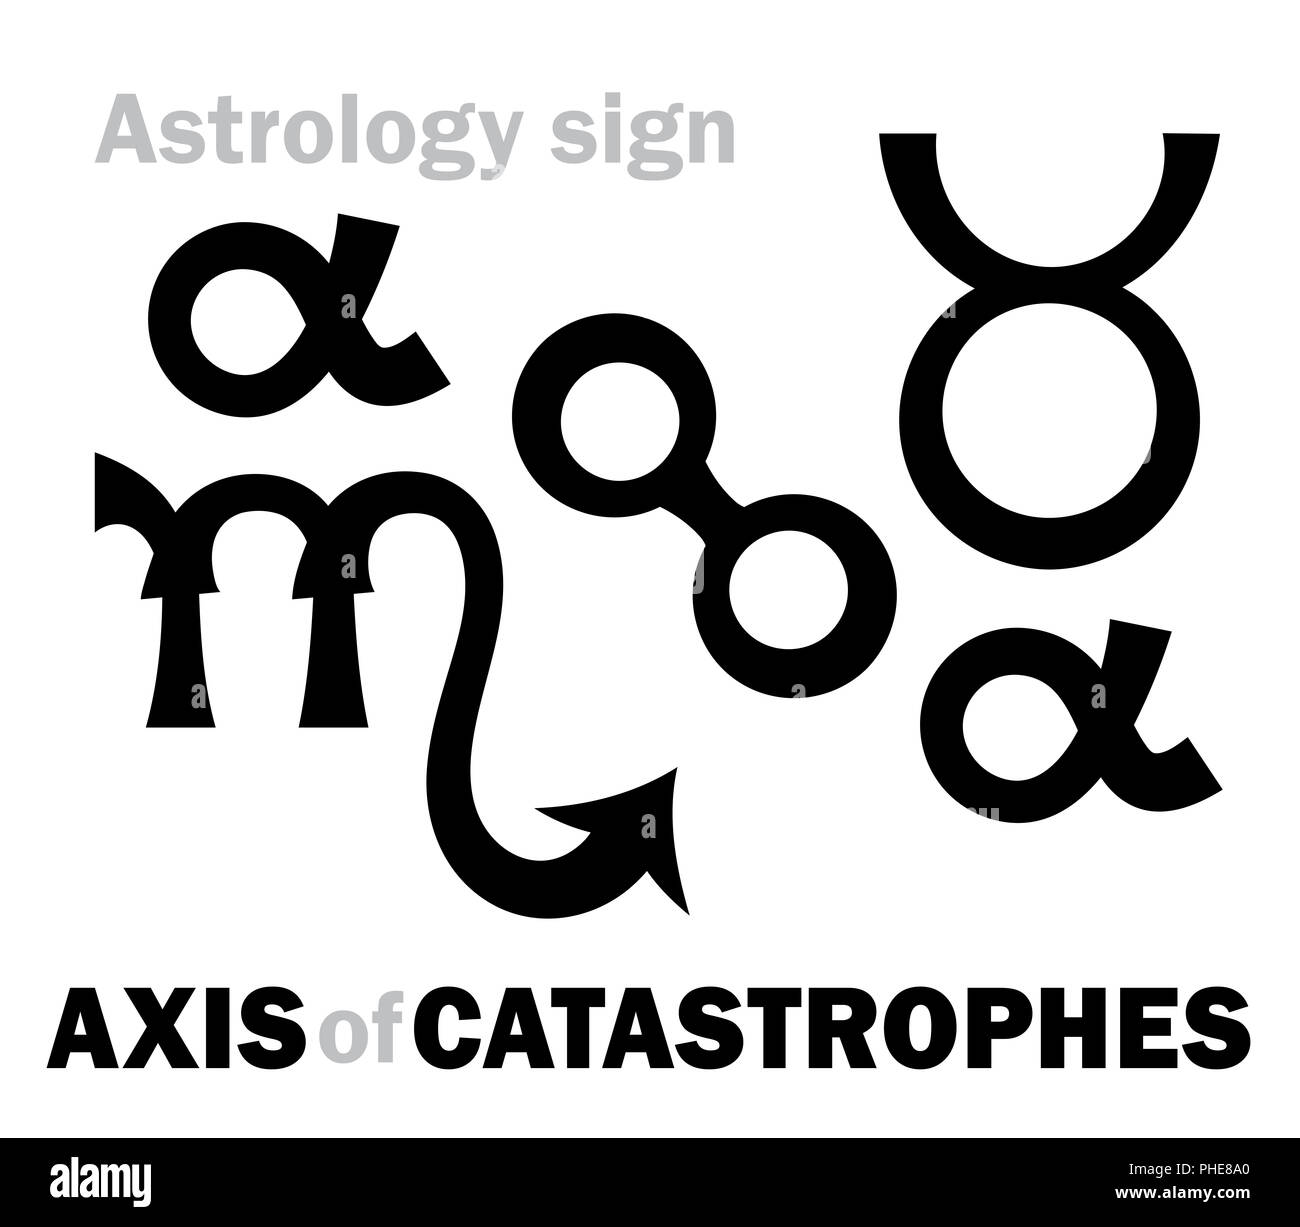 Astrology: AXIS of CATASTROPHES Stock Photo